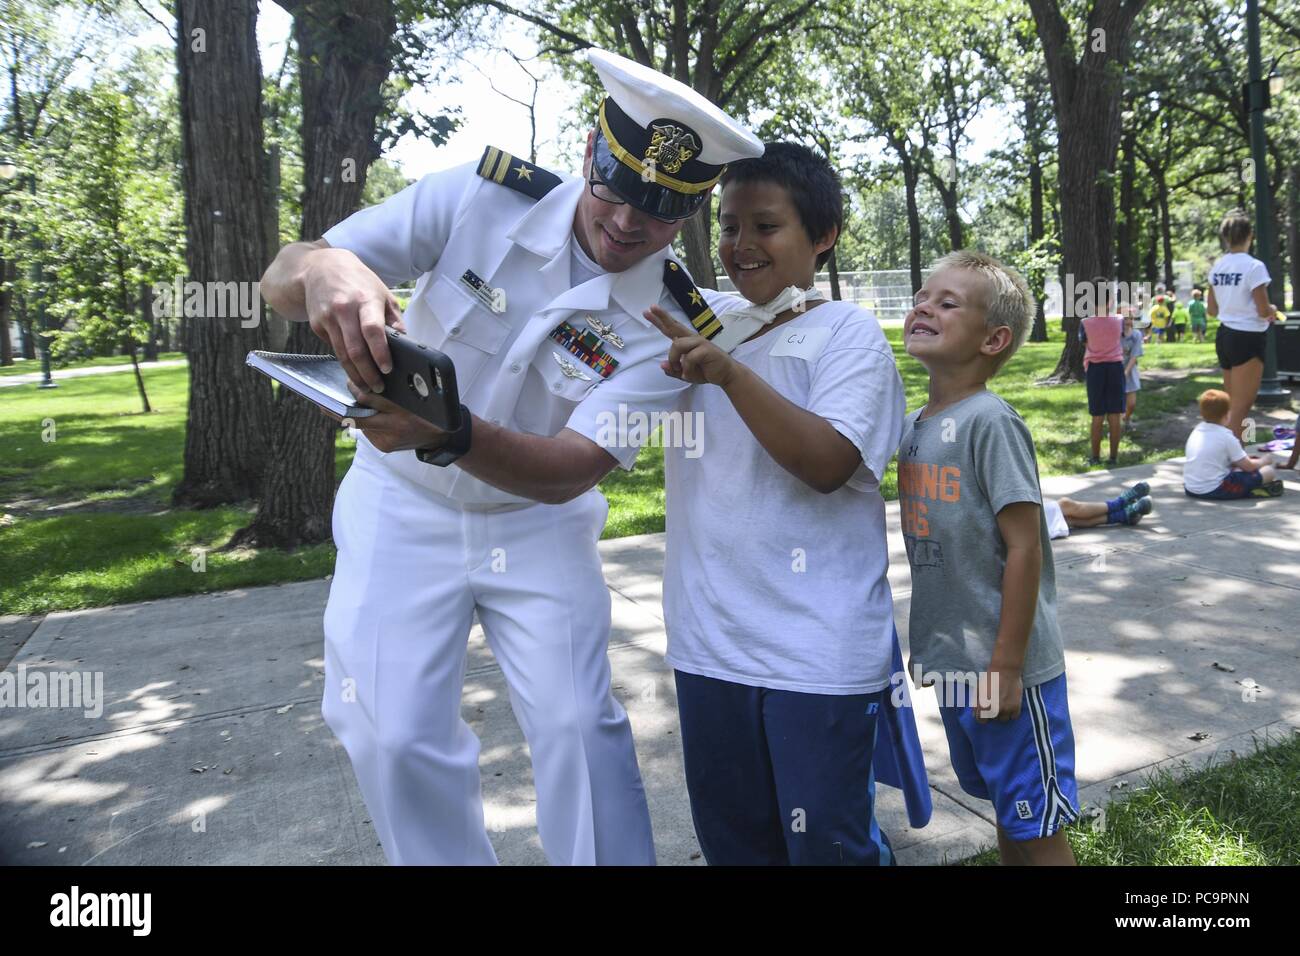 180724-N-VH385-0167 FARGO, N.D. (July 24, 2018) - Lt. Mack Jamieson, a native of Fulton, Miss. assigned to the Navy Office of Community Outreach, takes a selfie with children of the YMCA and local Boys and Girls Clubs at Island Park in Fargo, N.D. during Fargo-Moorhead Metro Navy Week, July 24, 2018. The Navy Office of Community Outreach uses the Navy Week program to bring Navy Sailors, equipment and displays to approximately 14 American cities each year for a week-long schedule of outreach engagements designed for Americans to experience first hand how the U.S. Navy is the Navy the nation nee Stock Photo